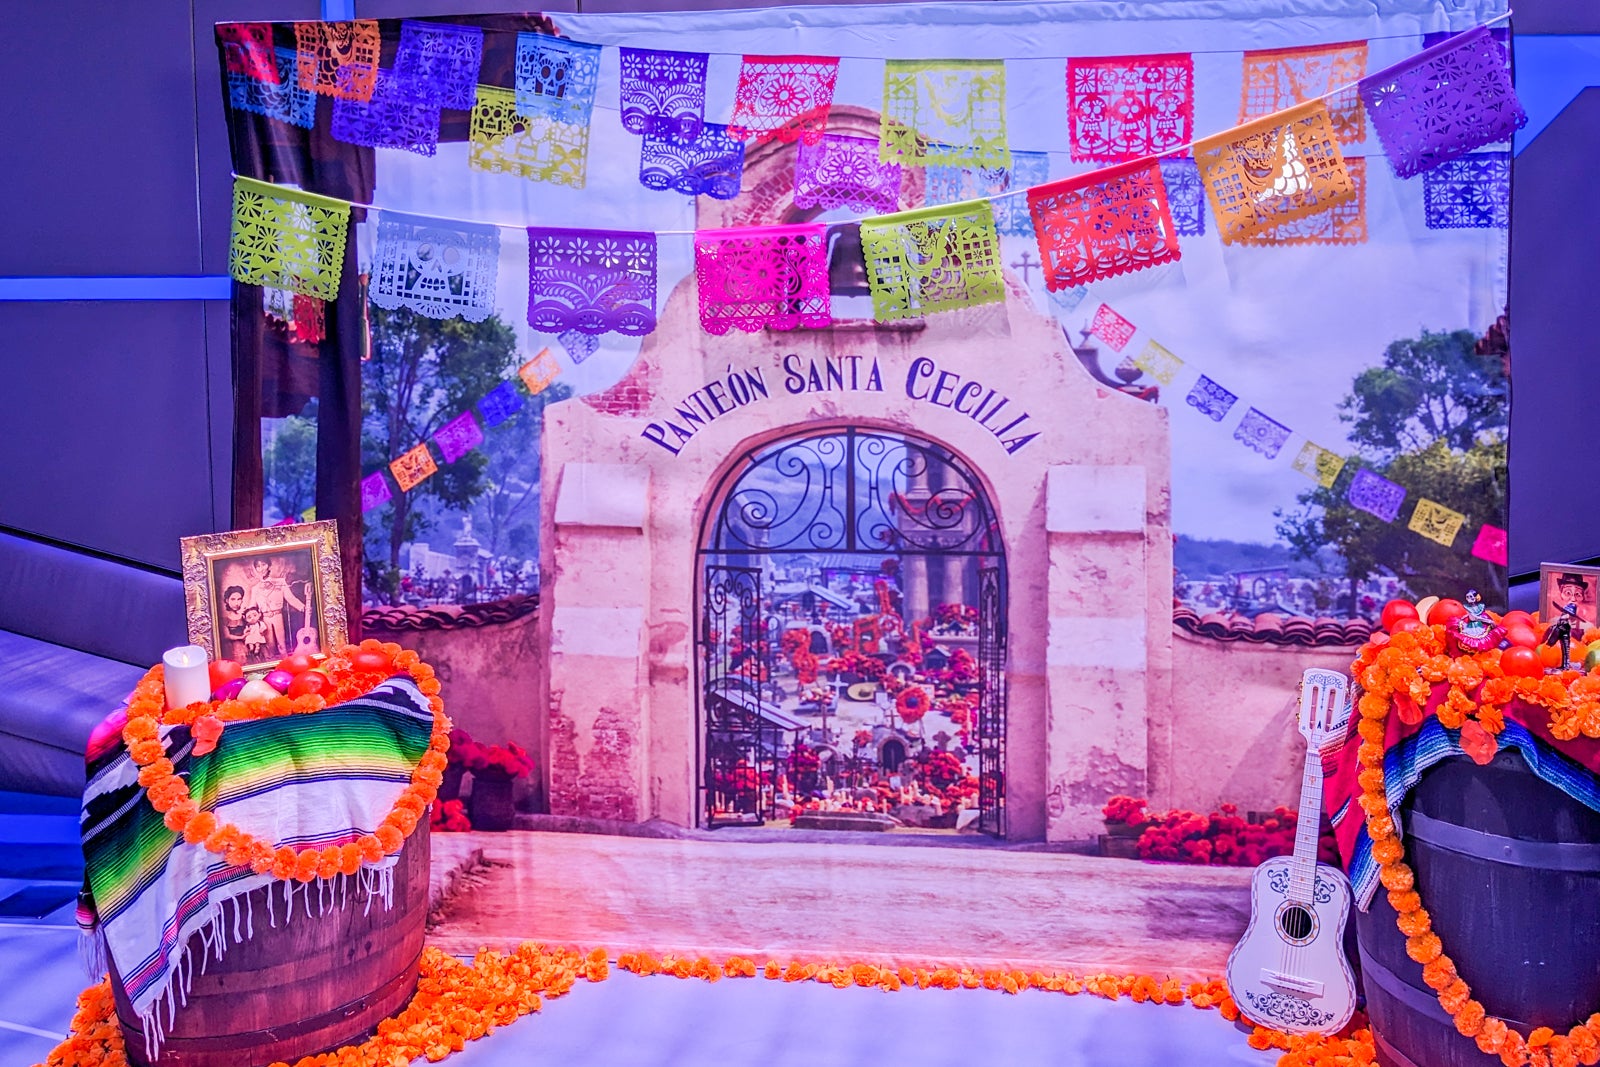 A photo backdrop of the town of Santa Cecilia from the movie "Coco."